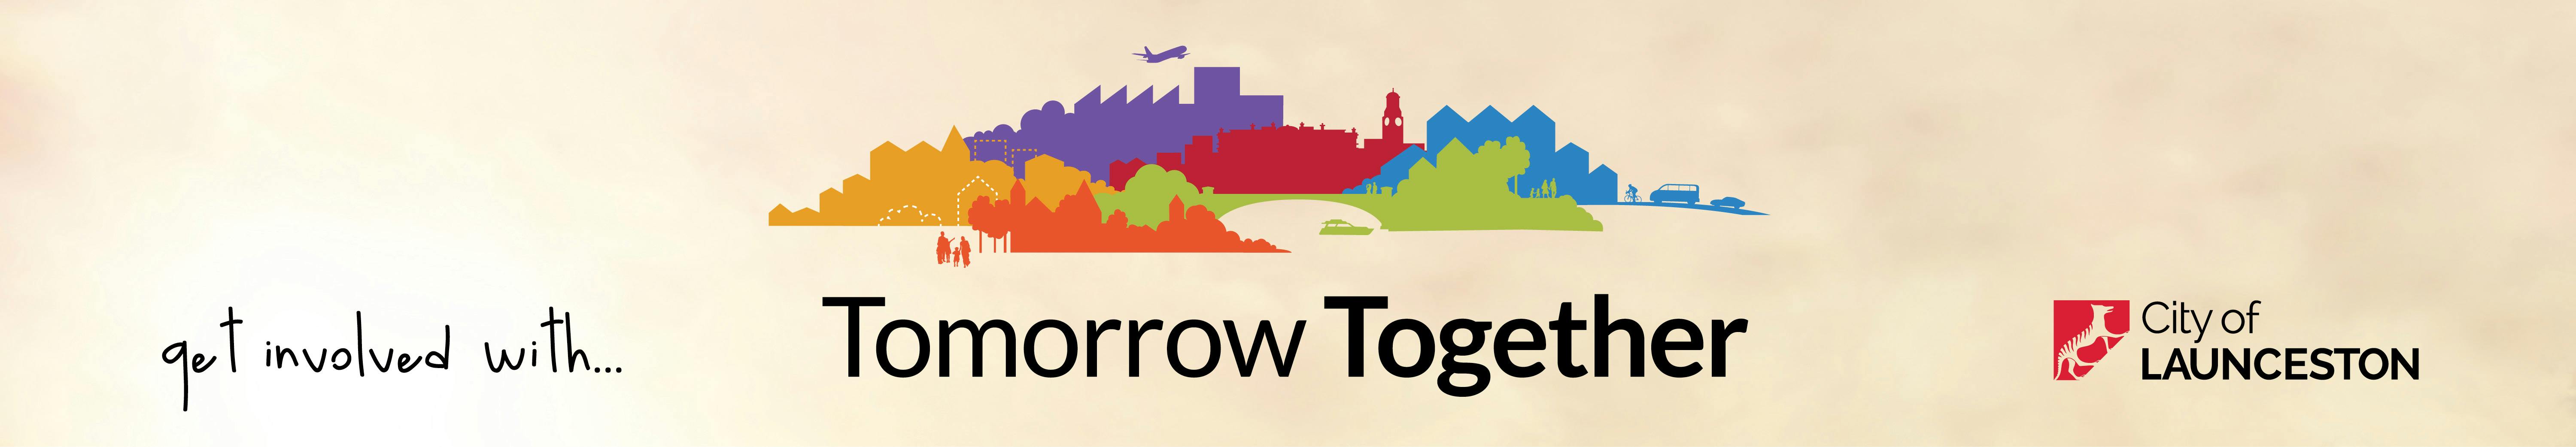 Get involved with Tomorrow Together at the City of Launceston